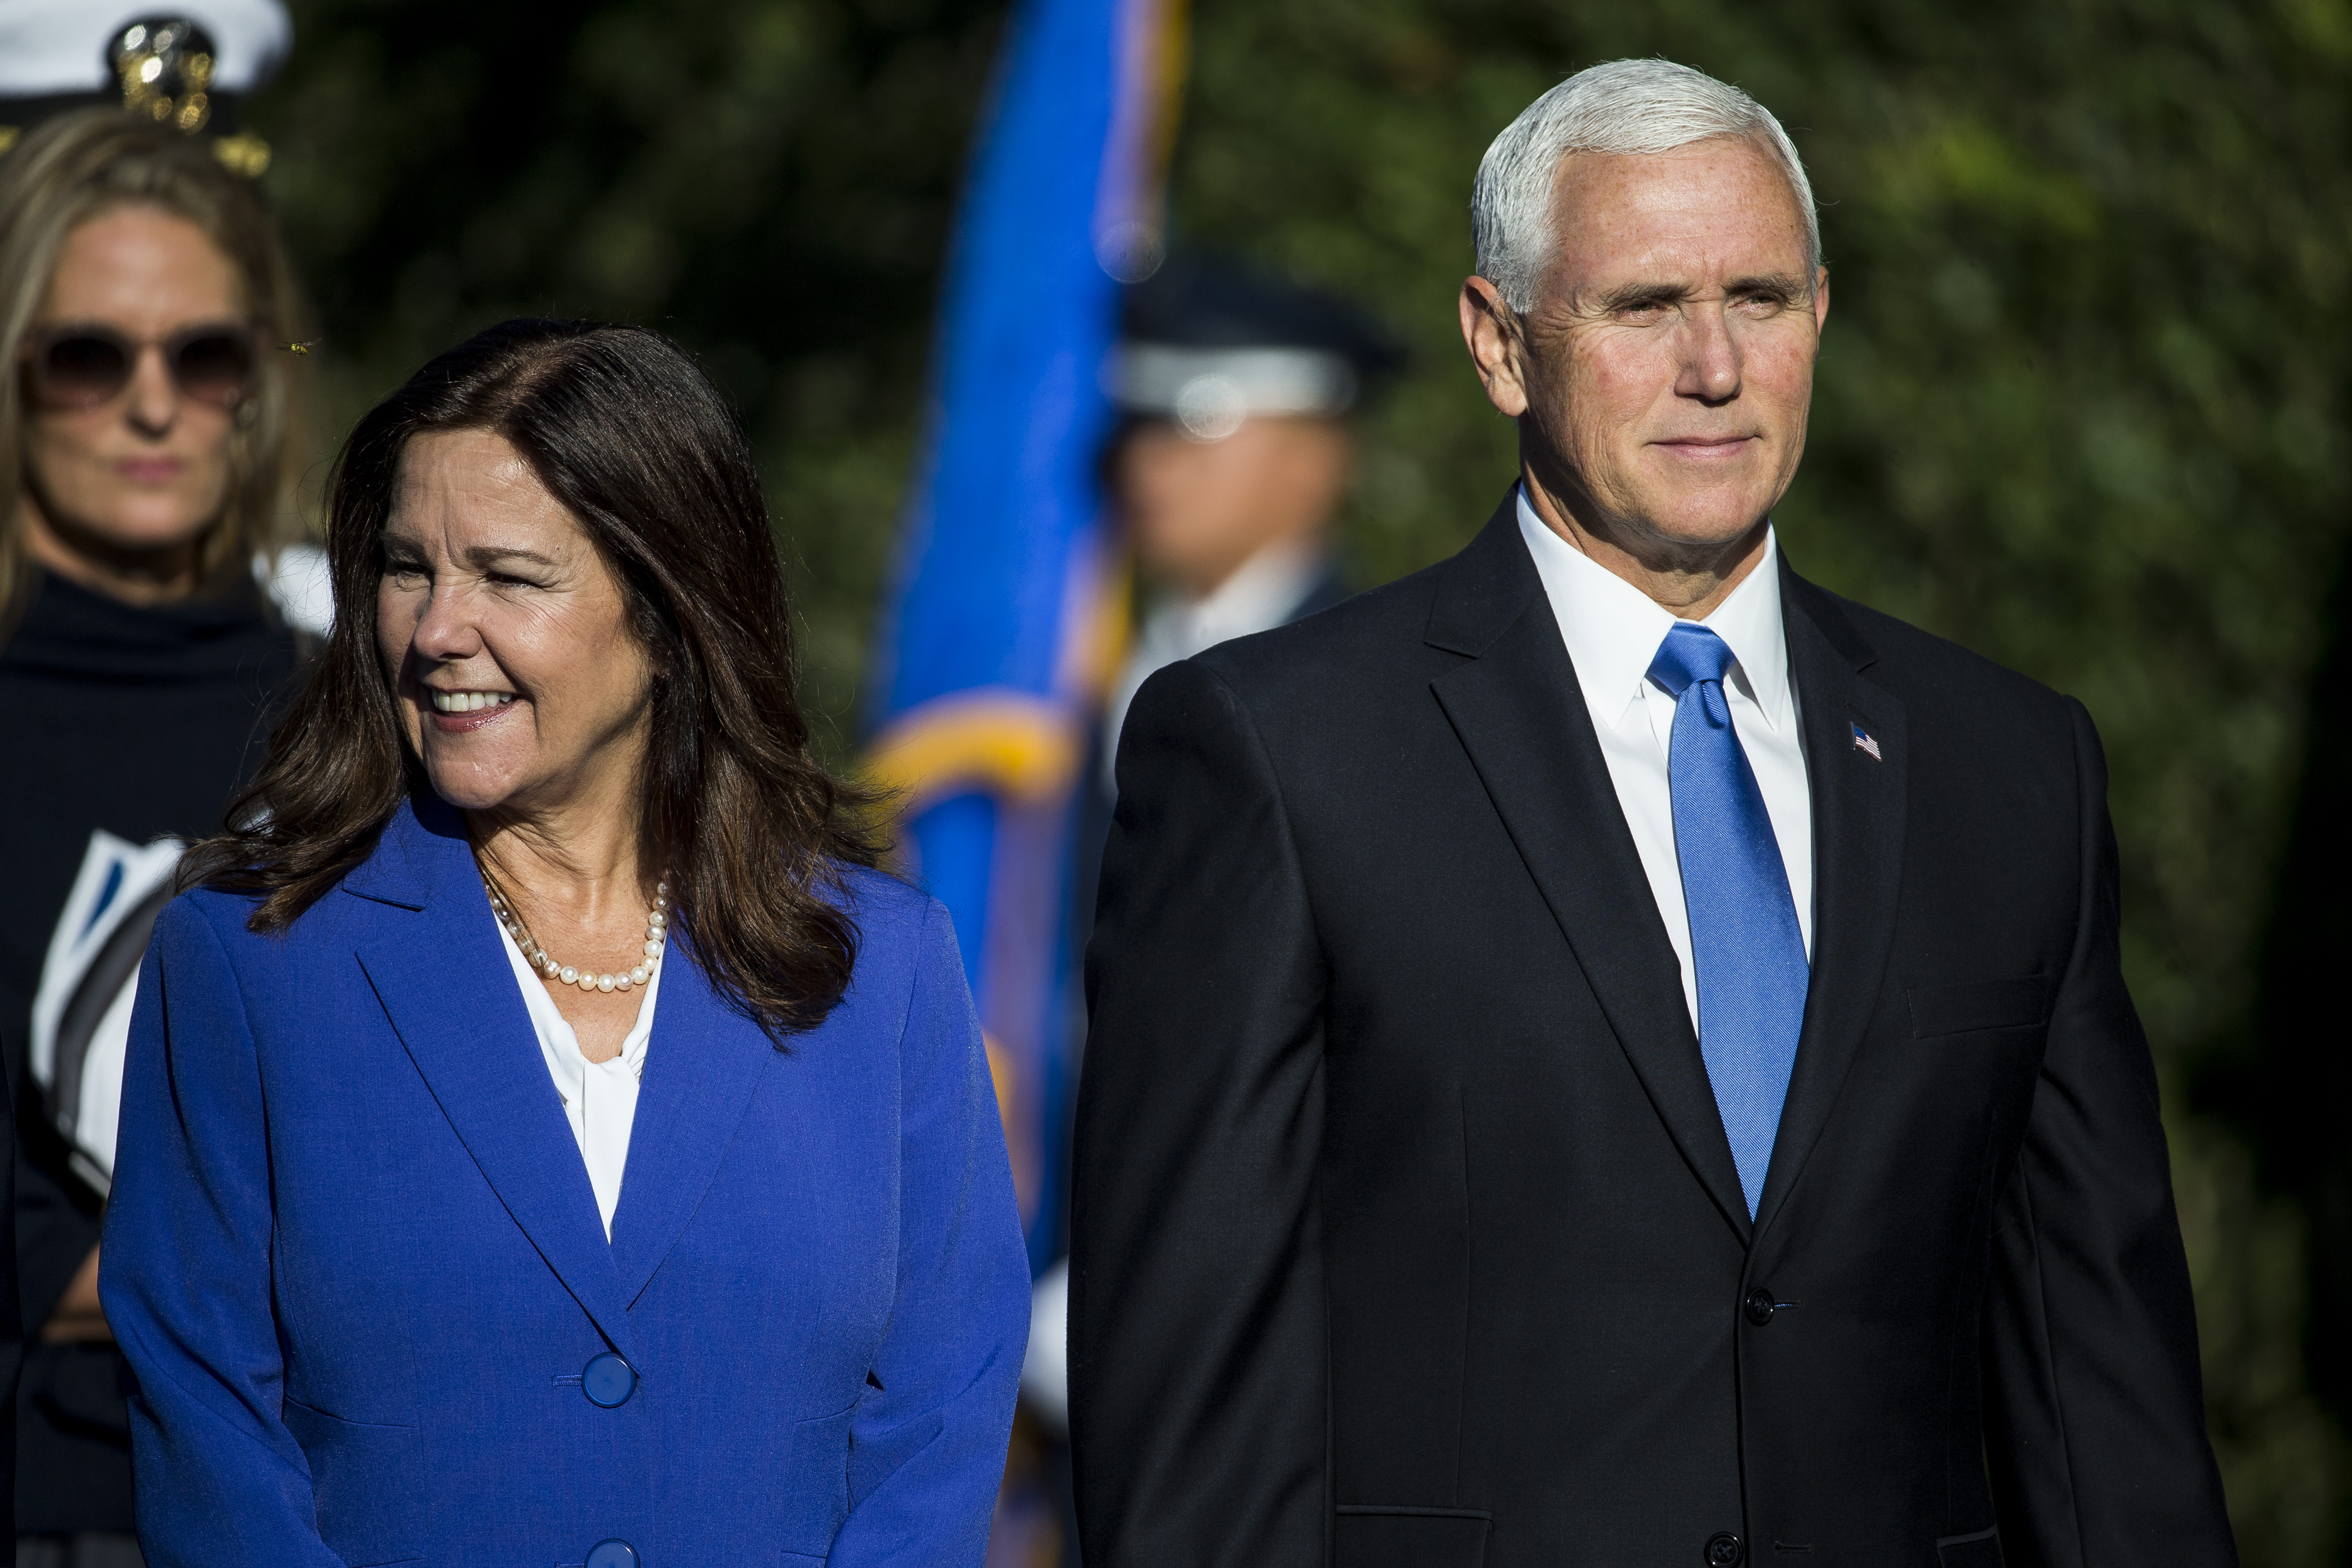 Second lady Karen Pence and Vice President Mike Pence are pictured at the White House on September 20, 2019.